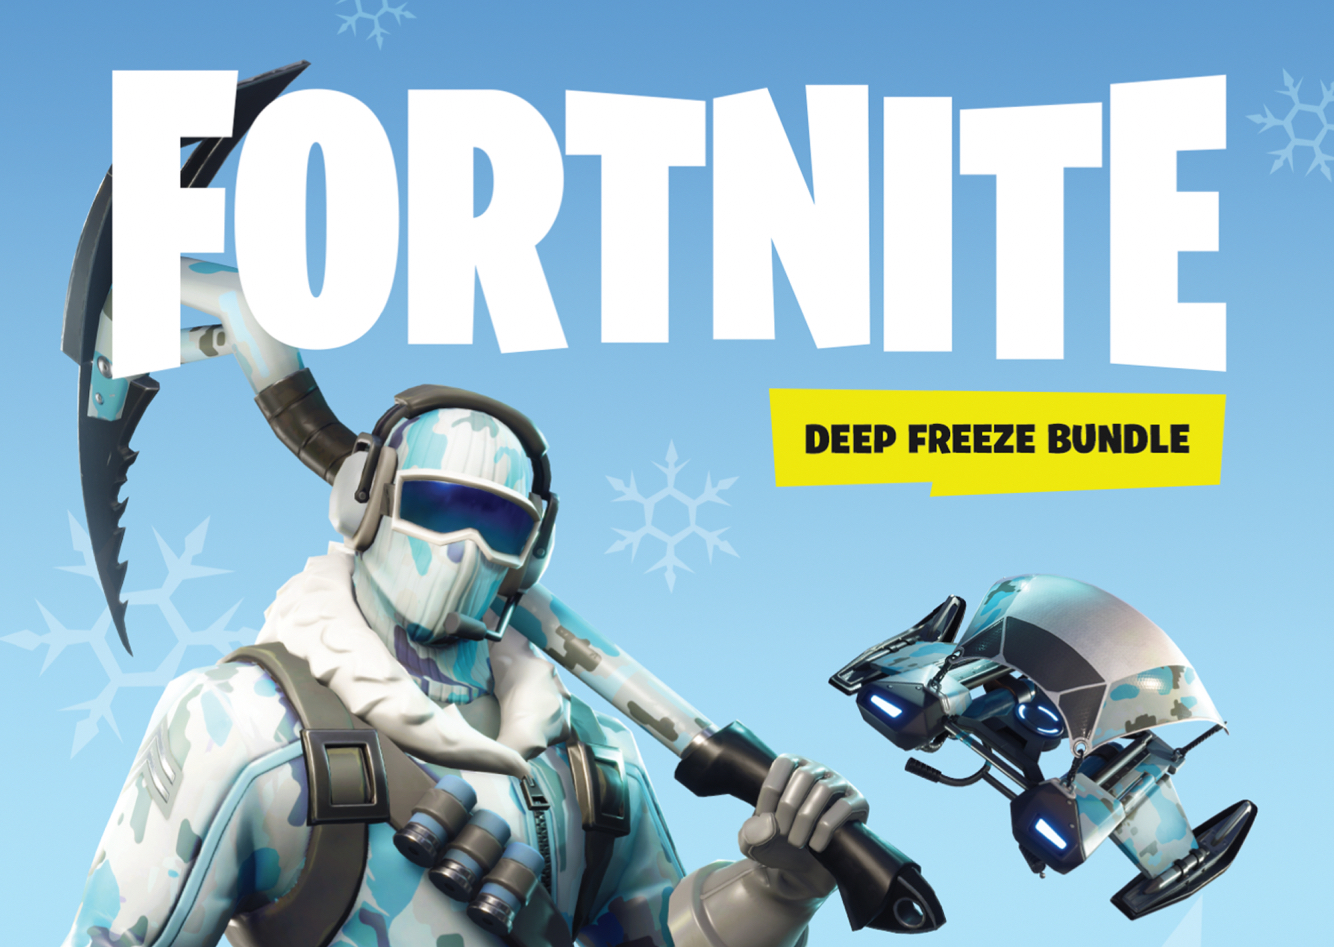 Sund mad eksplicit basen Fortnite heads to retail this November with Warner Bros distributing a Deep  Freeze Bundle for Switch, PS4, and Xbox One | GodisaGeek.com